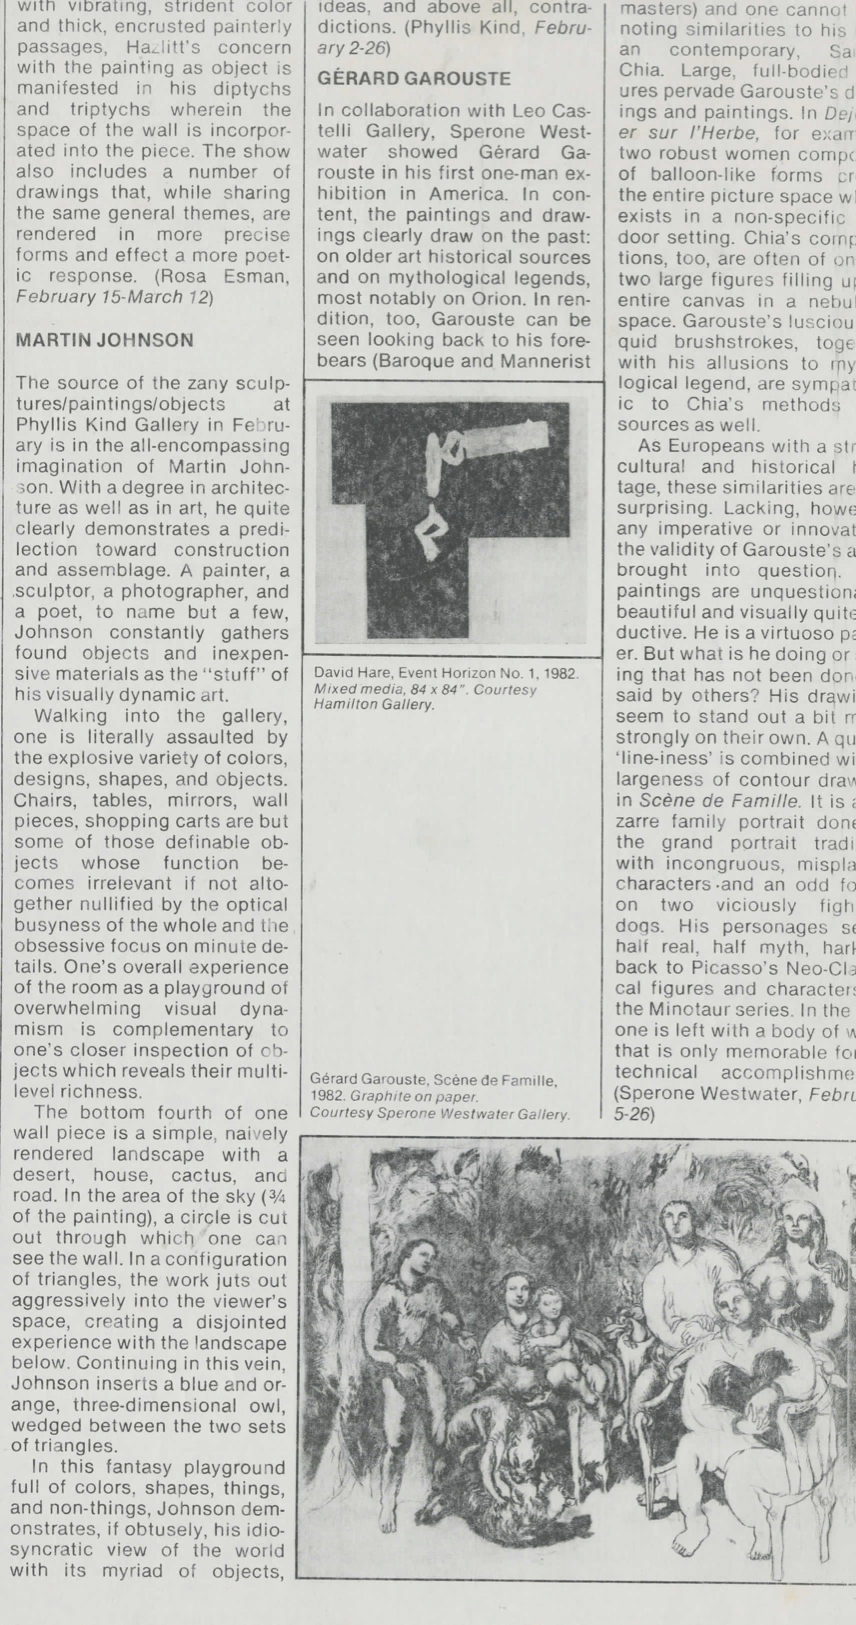 Review of "Martin Johnson at Phyllis Kind," Feb. 1983